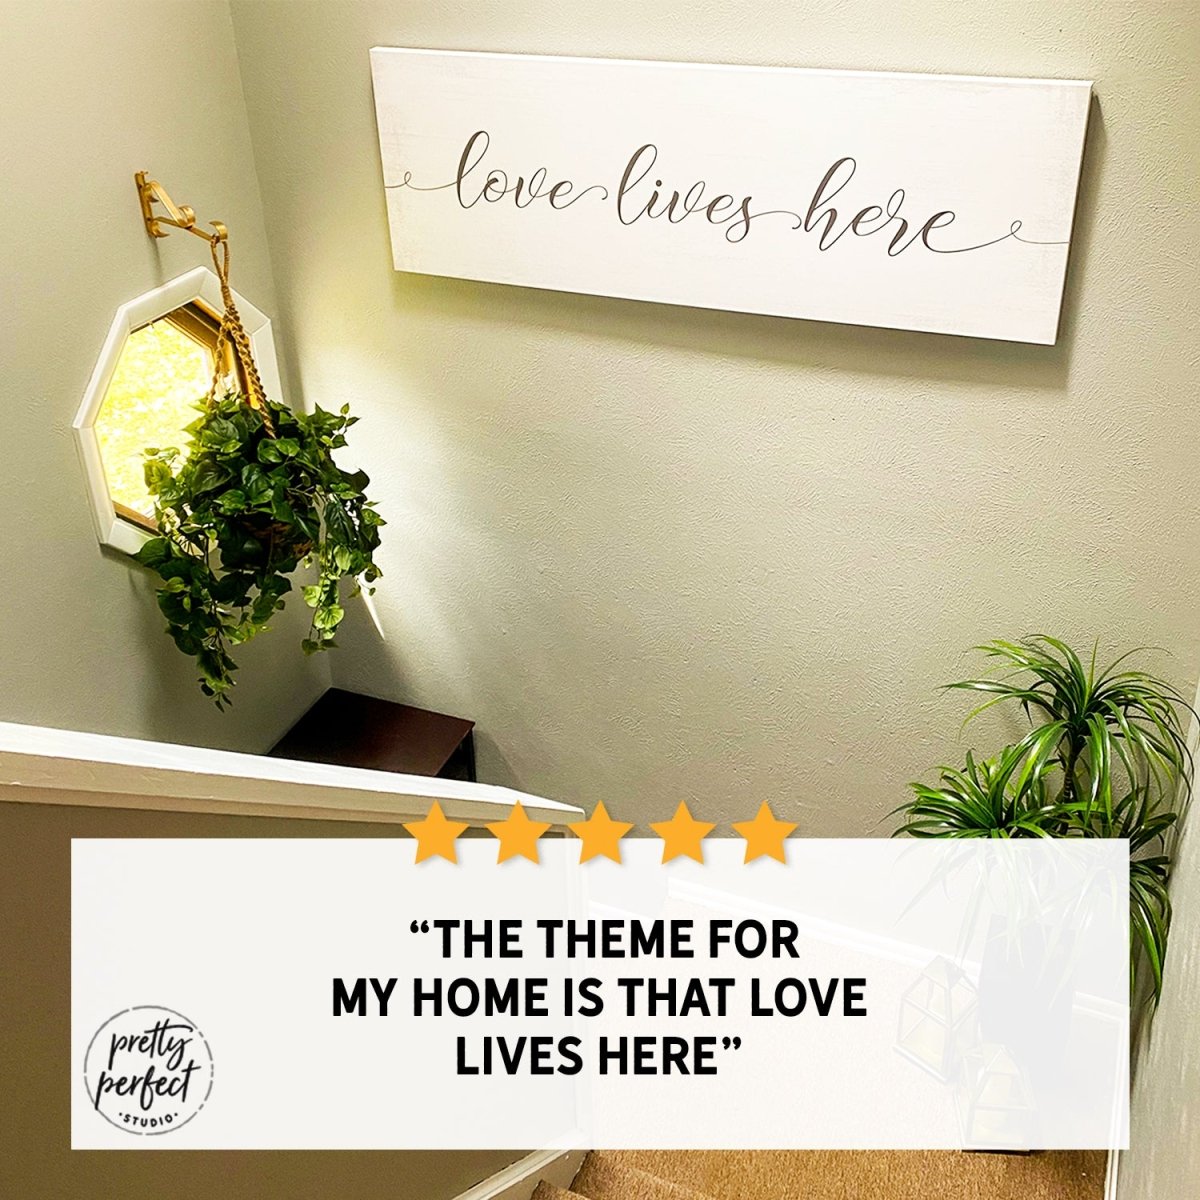 Customer product review for Love Lives Here Sign by Pretty Perfect Studio